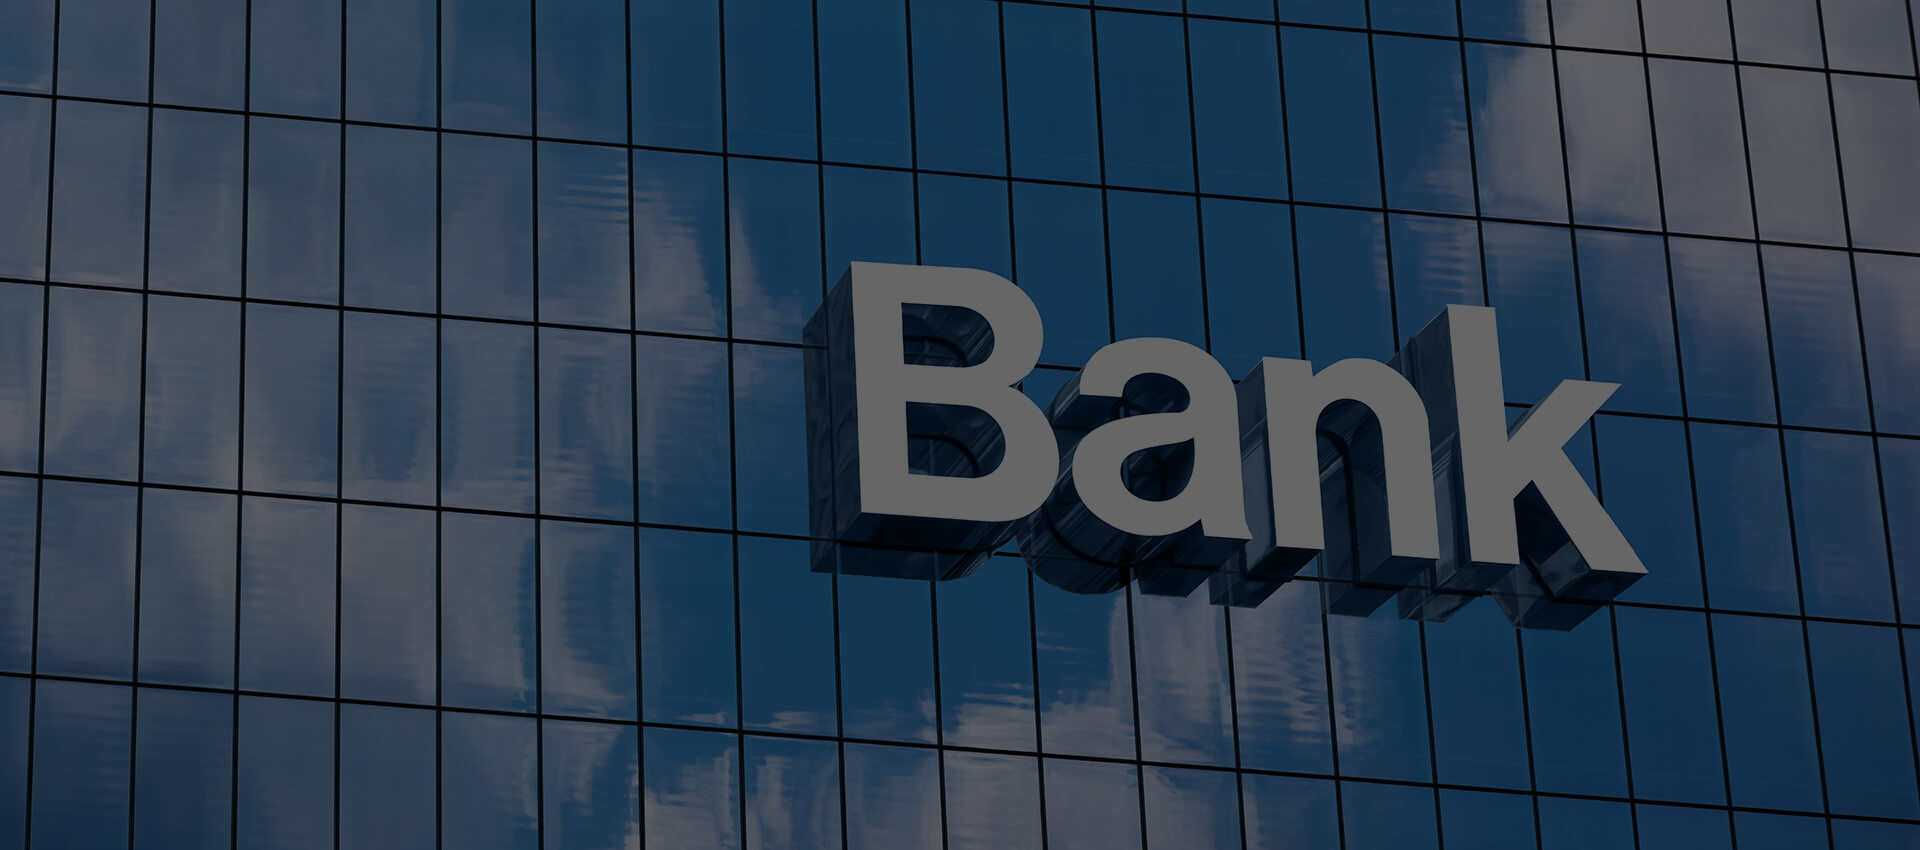 Customized Channel Letter Signs for Bank by QC Signs & Graphics in Charlotte, NC